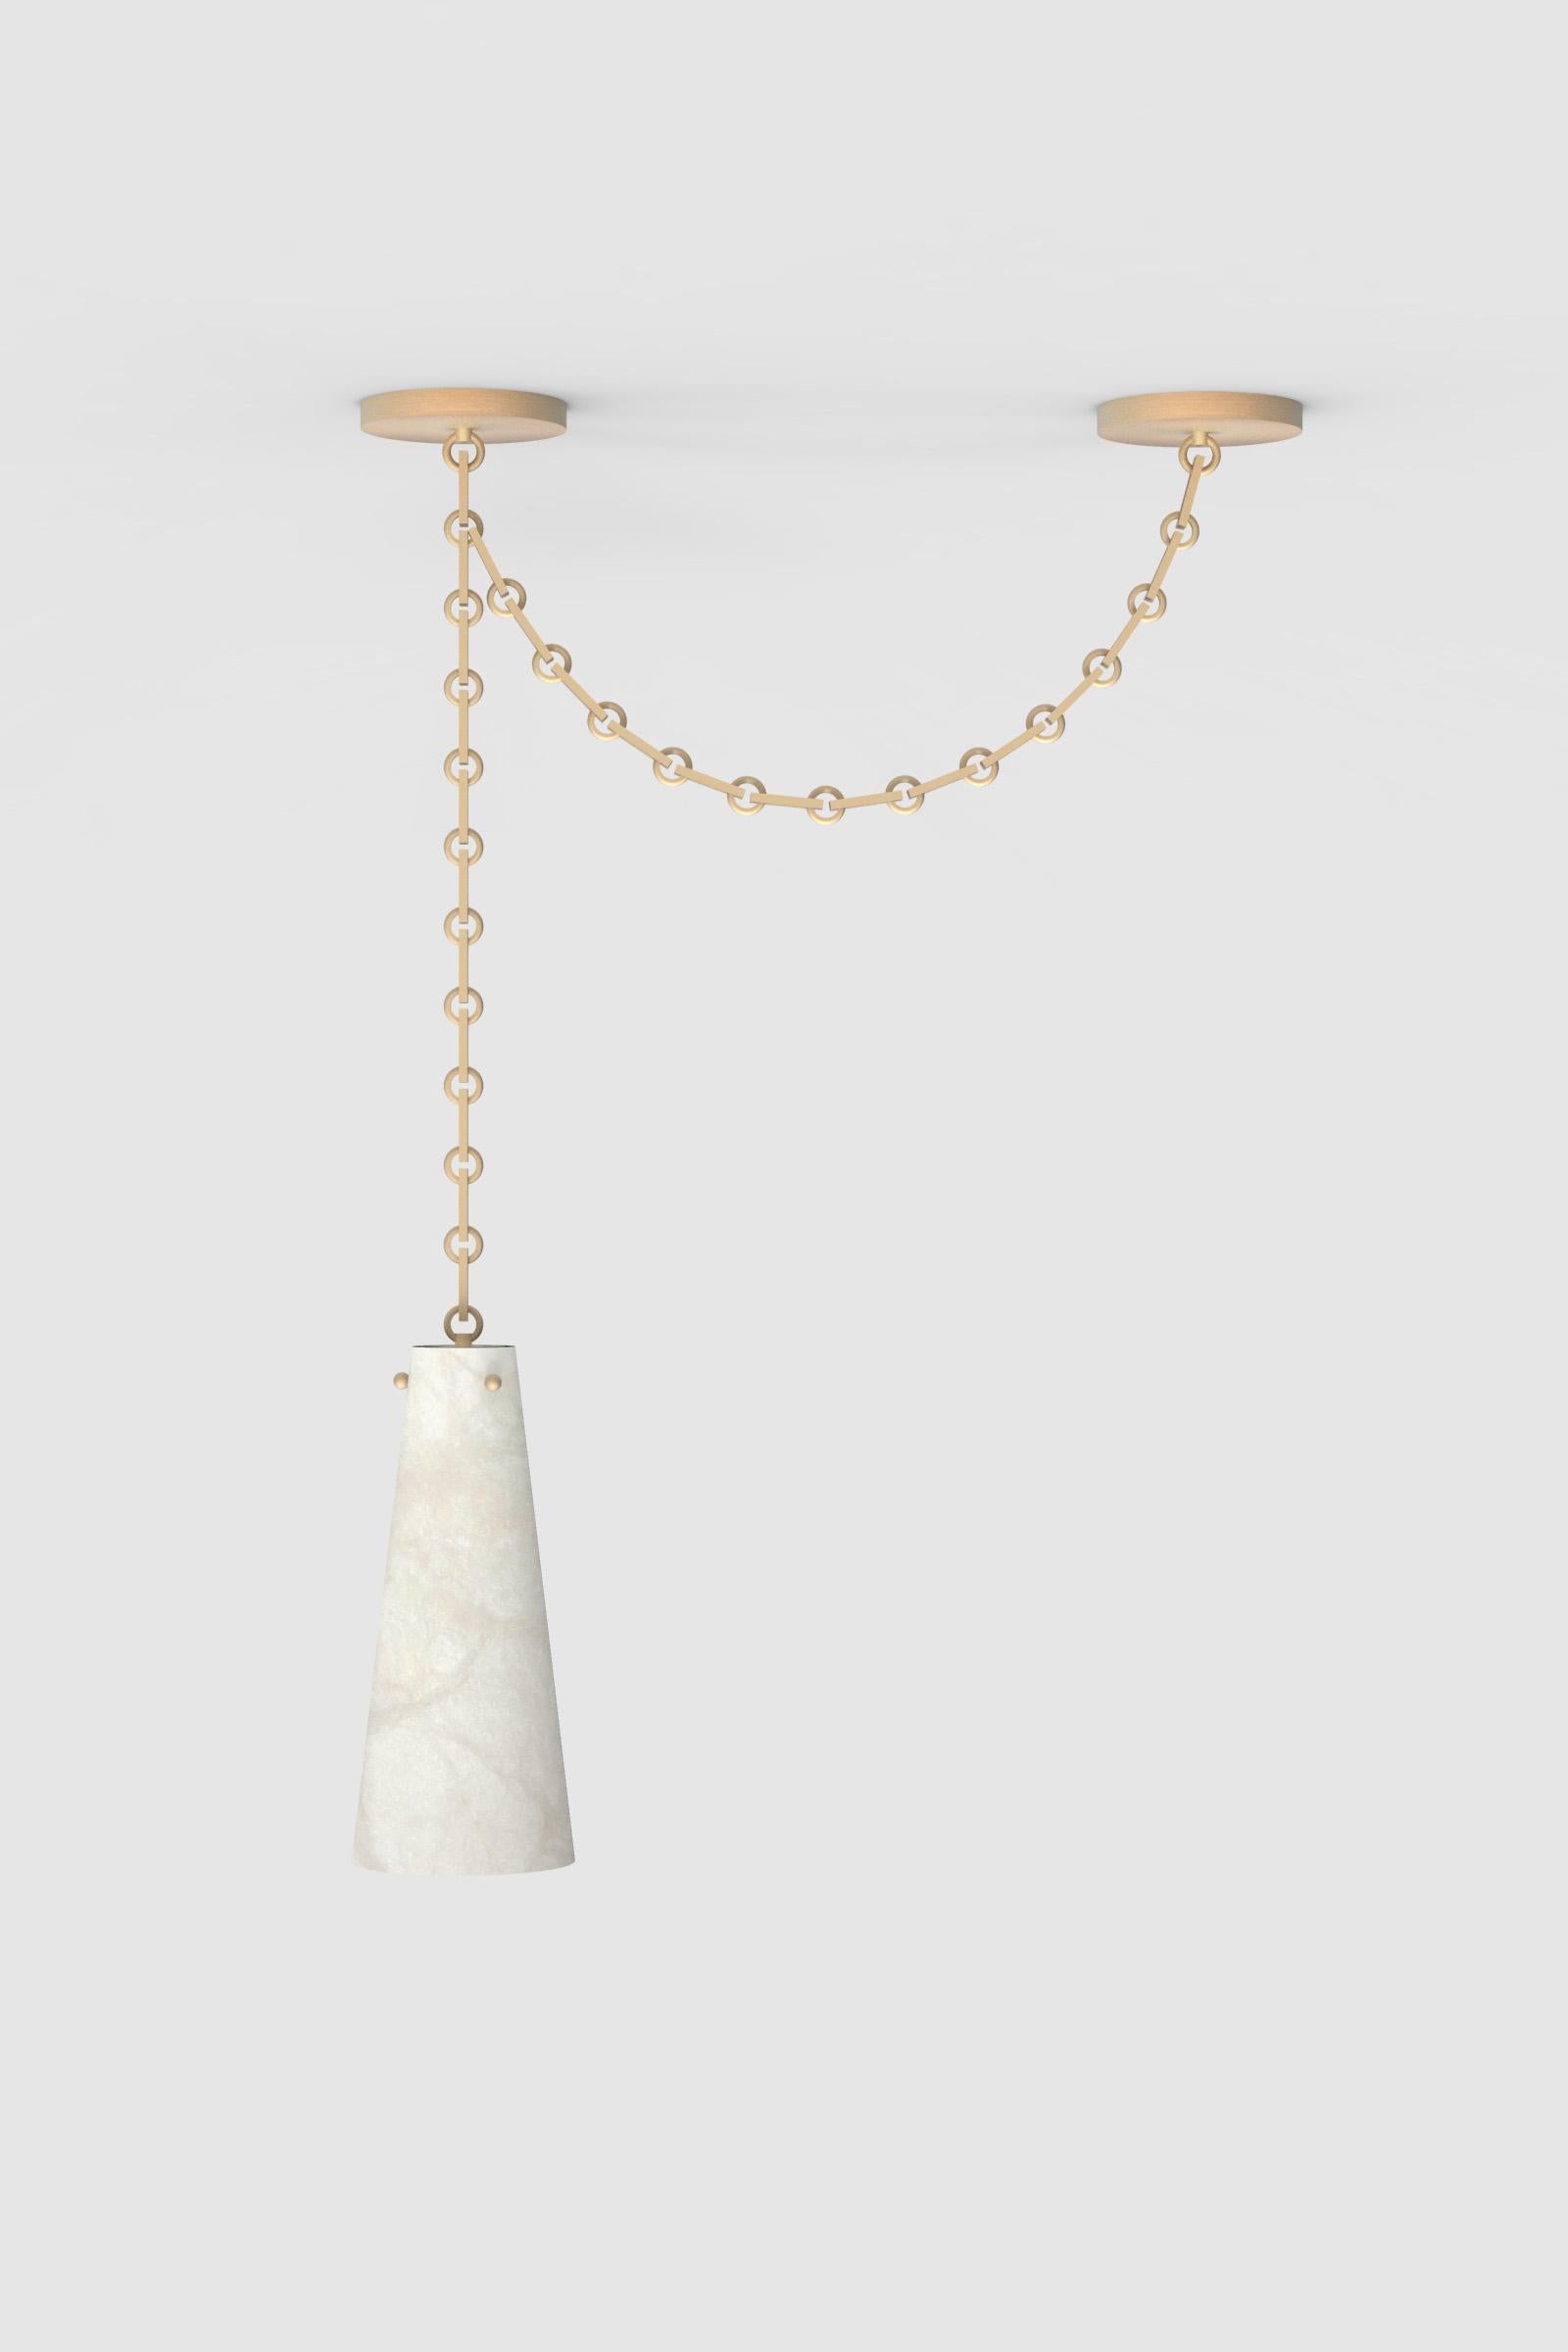 Post-Modern Contemporary Lucca Pendant 202A-1S in Alabaster by Orphan Work, 2021 For Sale